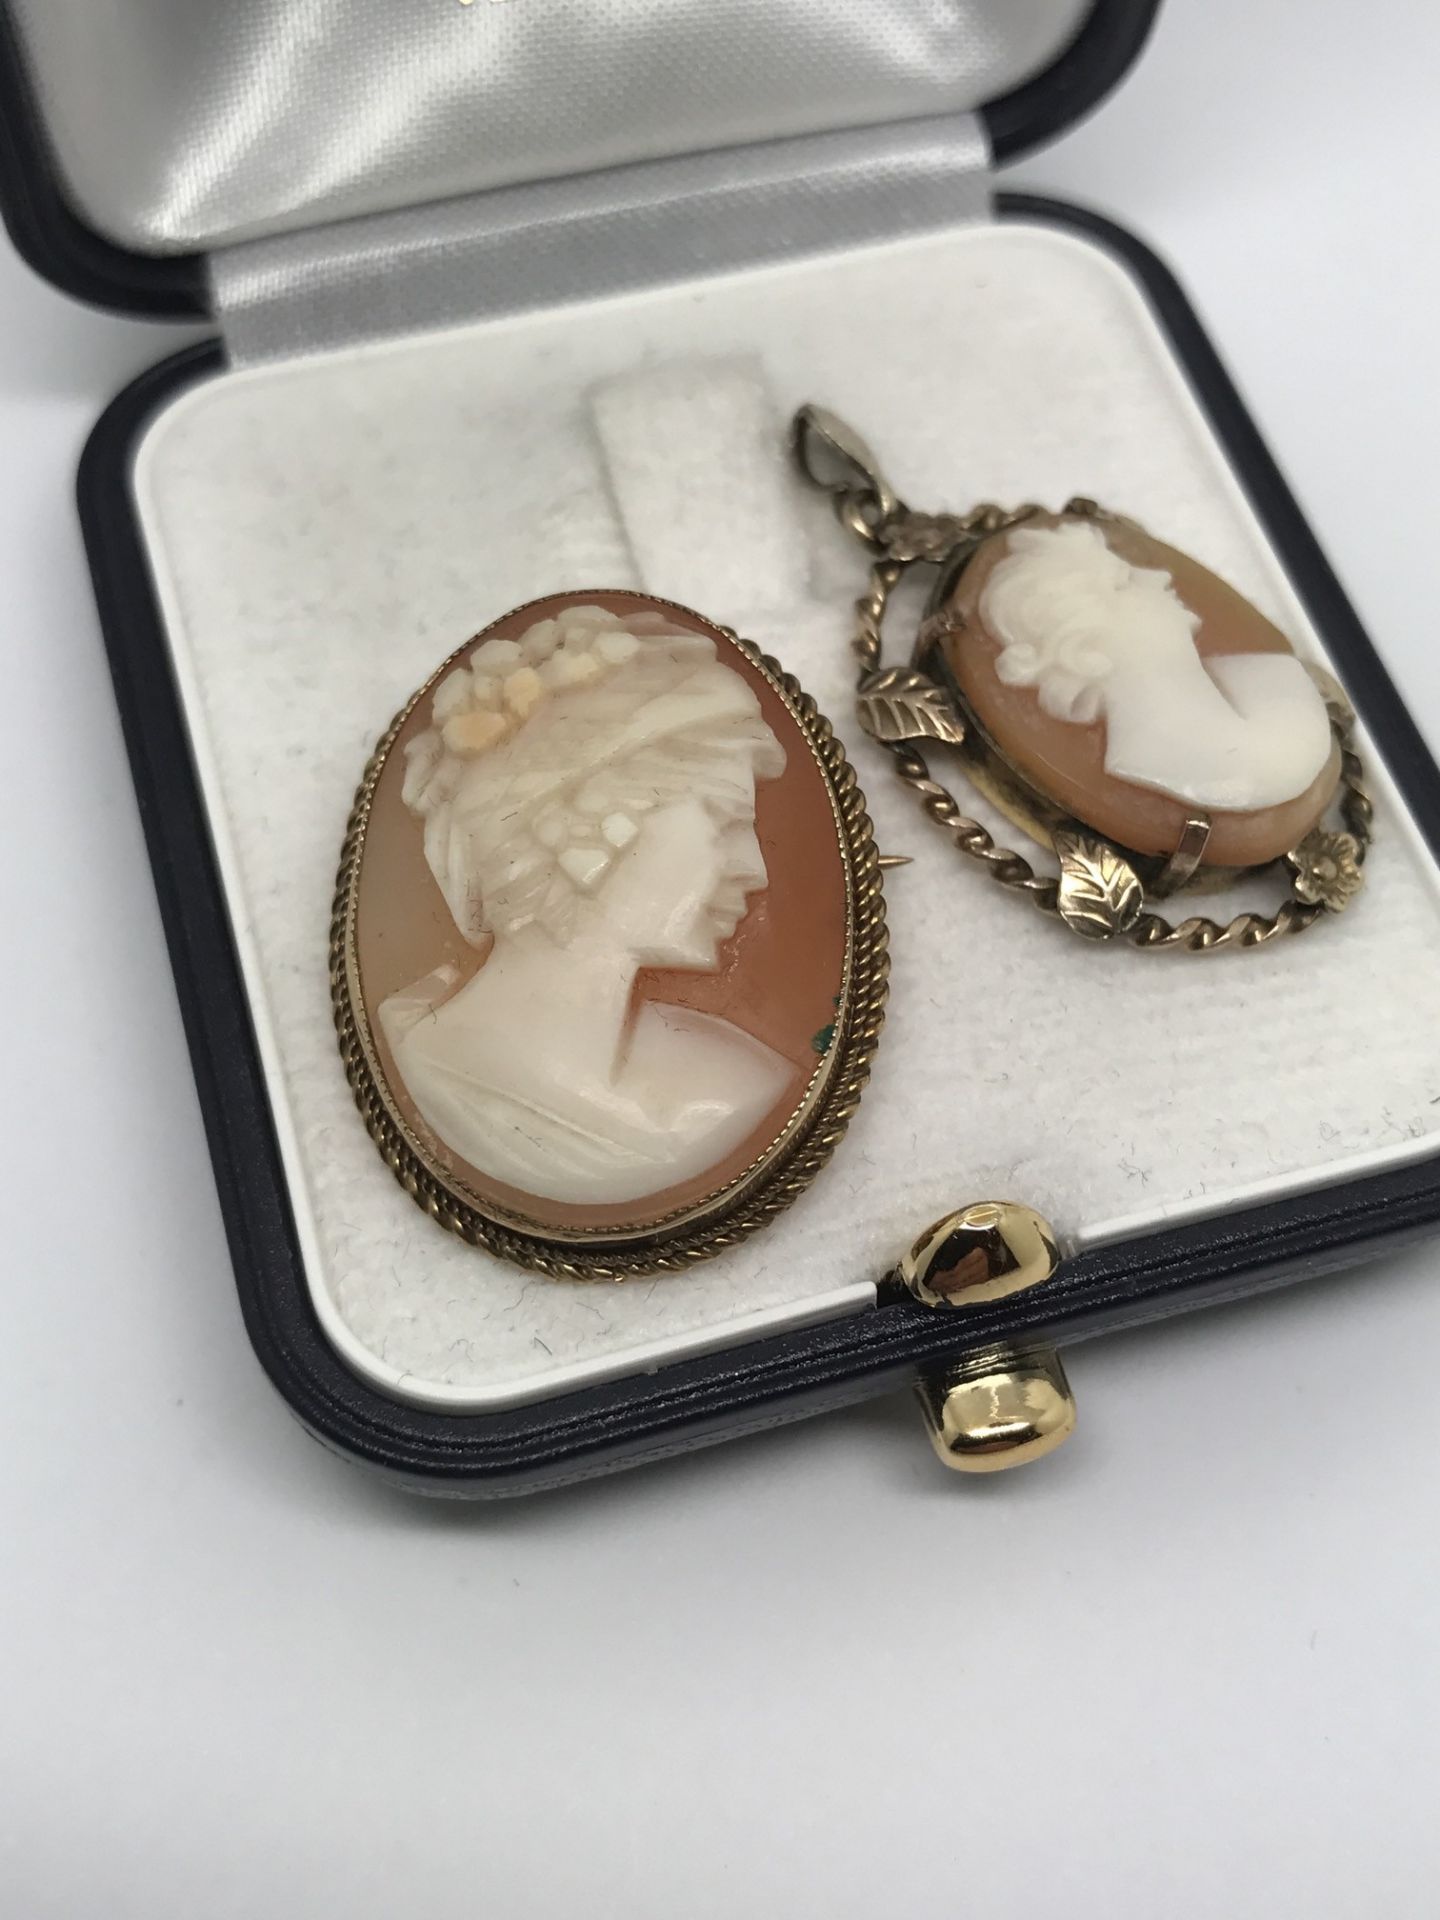 9ct GOLD CAMEO BROOCH + 1 GOLD COLOURED CAMEO LOCKET - Image 2 of 3